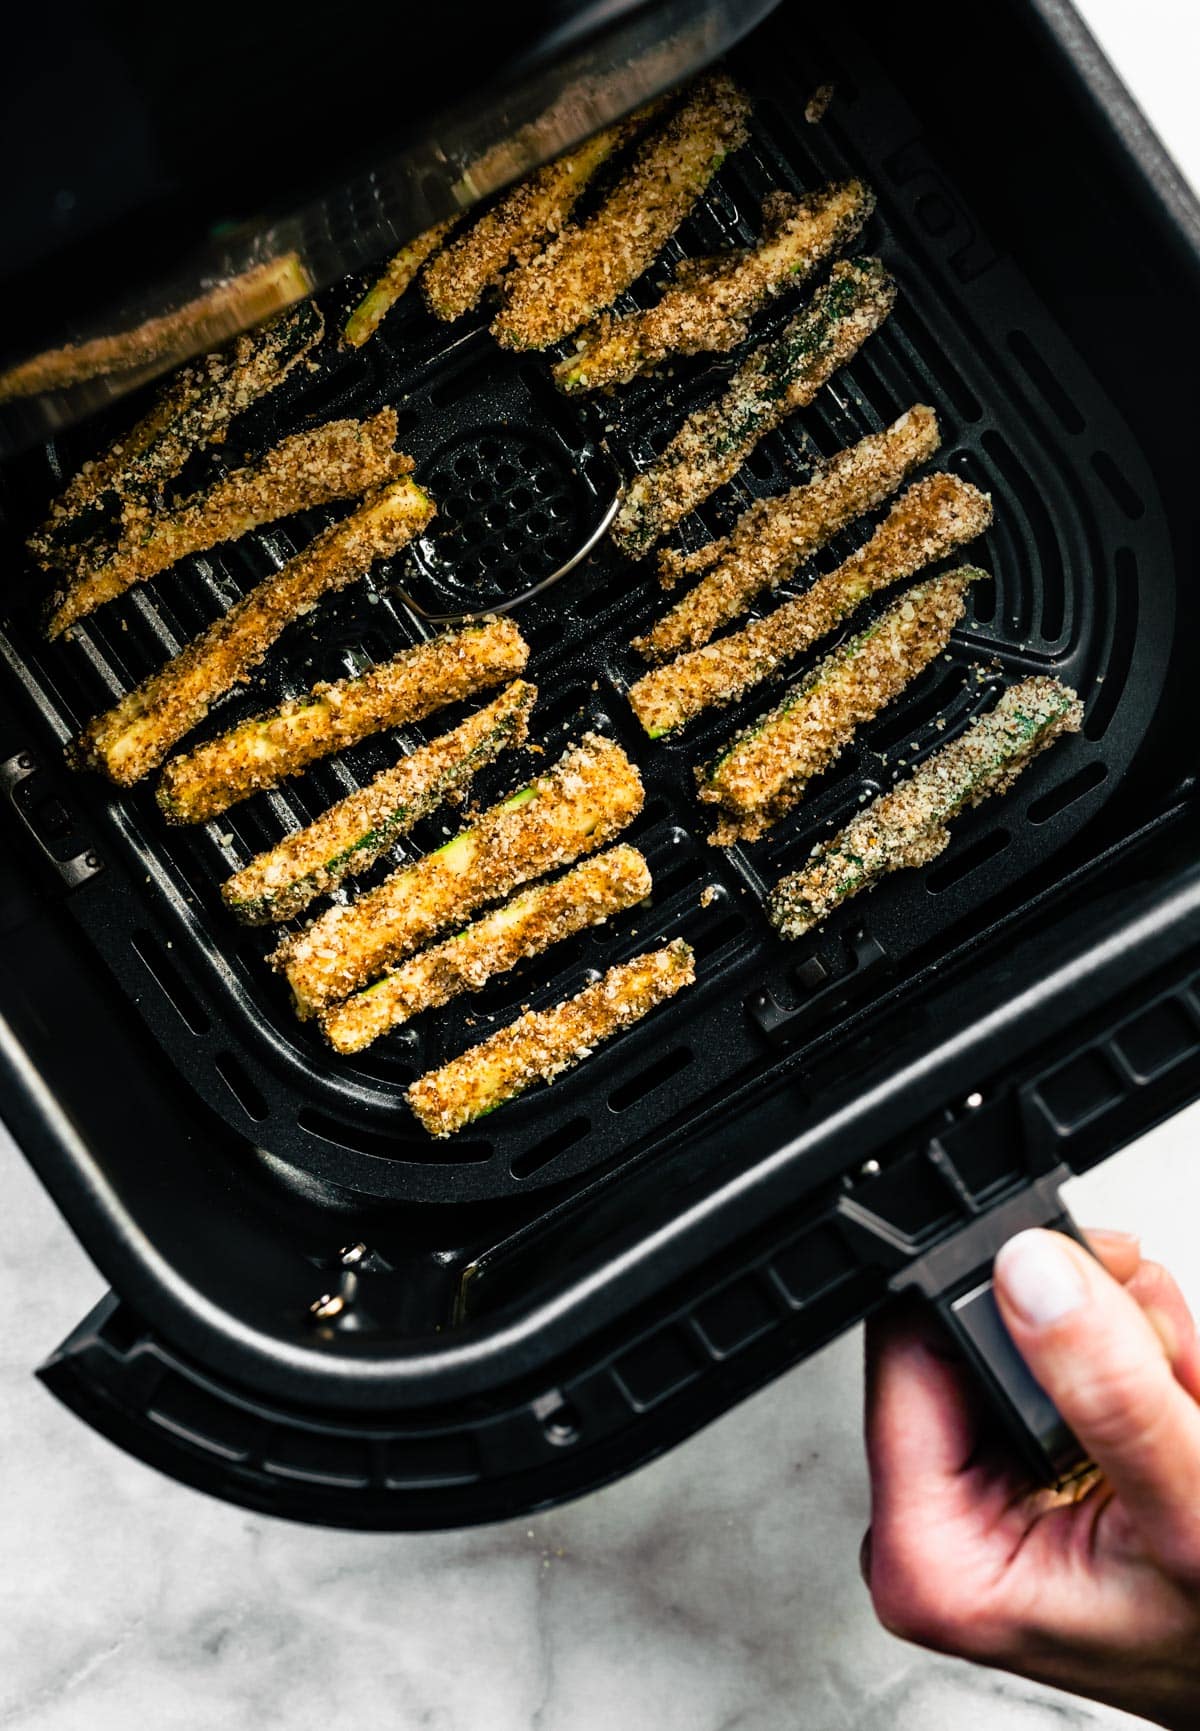 A hand holding an air fryer basket full of uncooked air fryer zucchini fries.